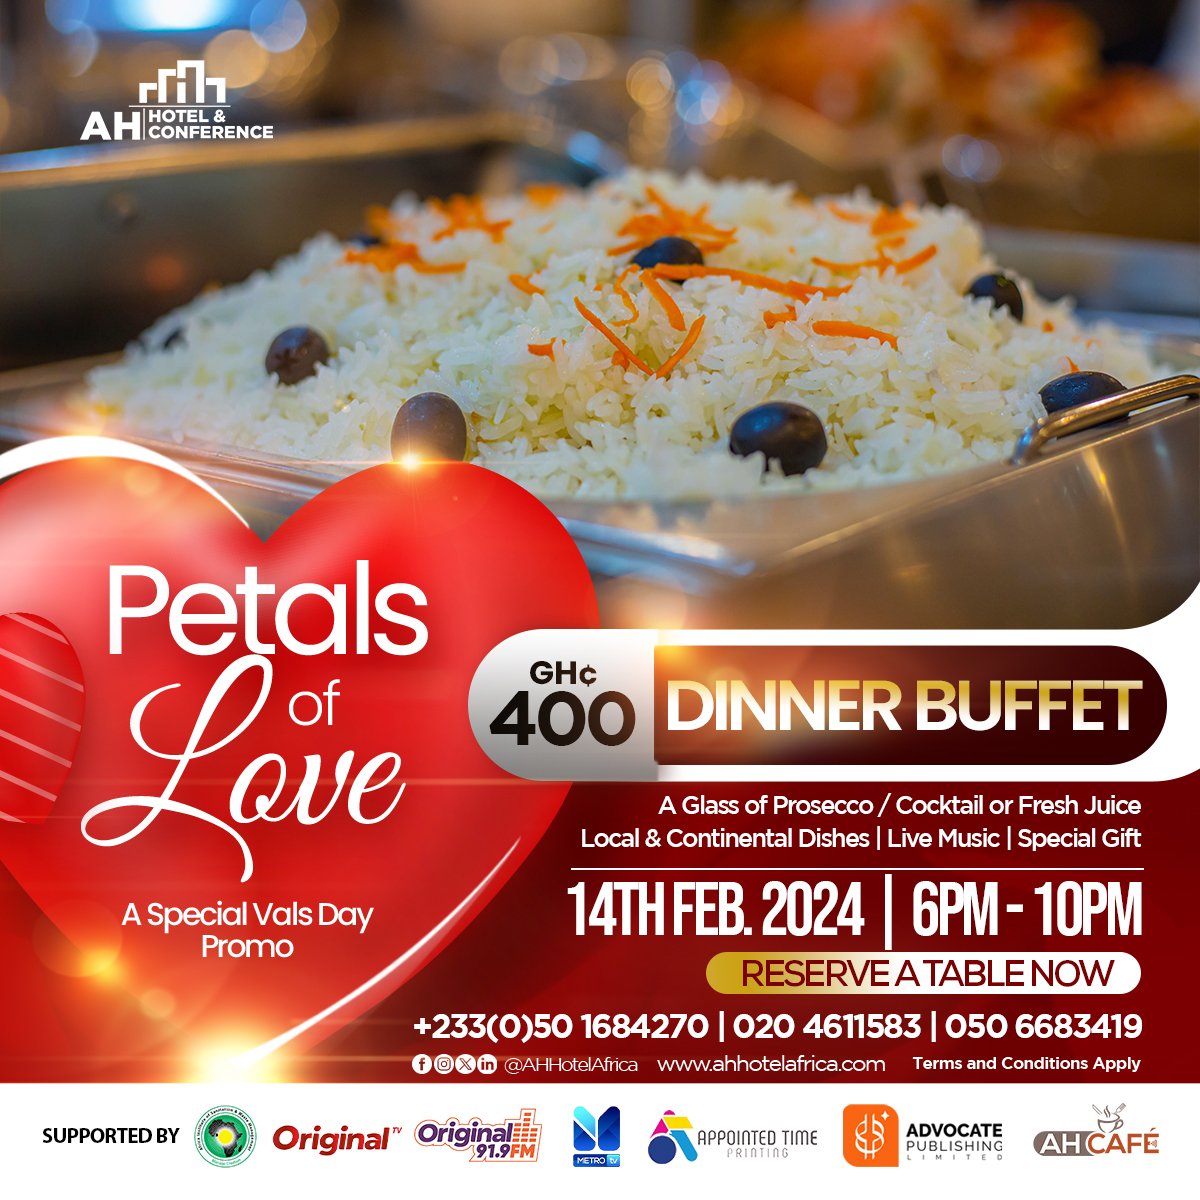 Celebrate #ValentinesDay at our Petals of Love Dinner Buffet! Revel in a glass of Prosecco, signature cocktails, or fresh juice. Delight in a variety of Local & Continental Dishes while immersed in live music. Call now to make reservations: +233(0)50 1684270, 020 4611583.